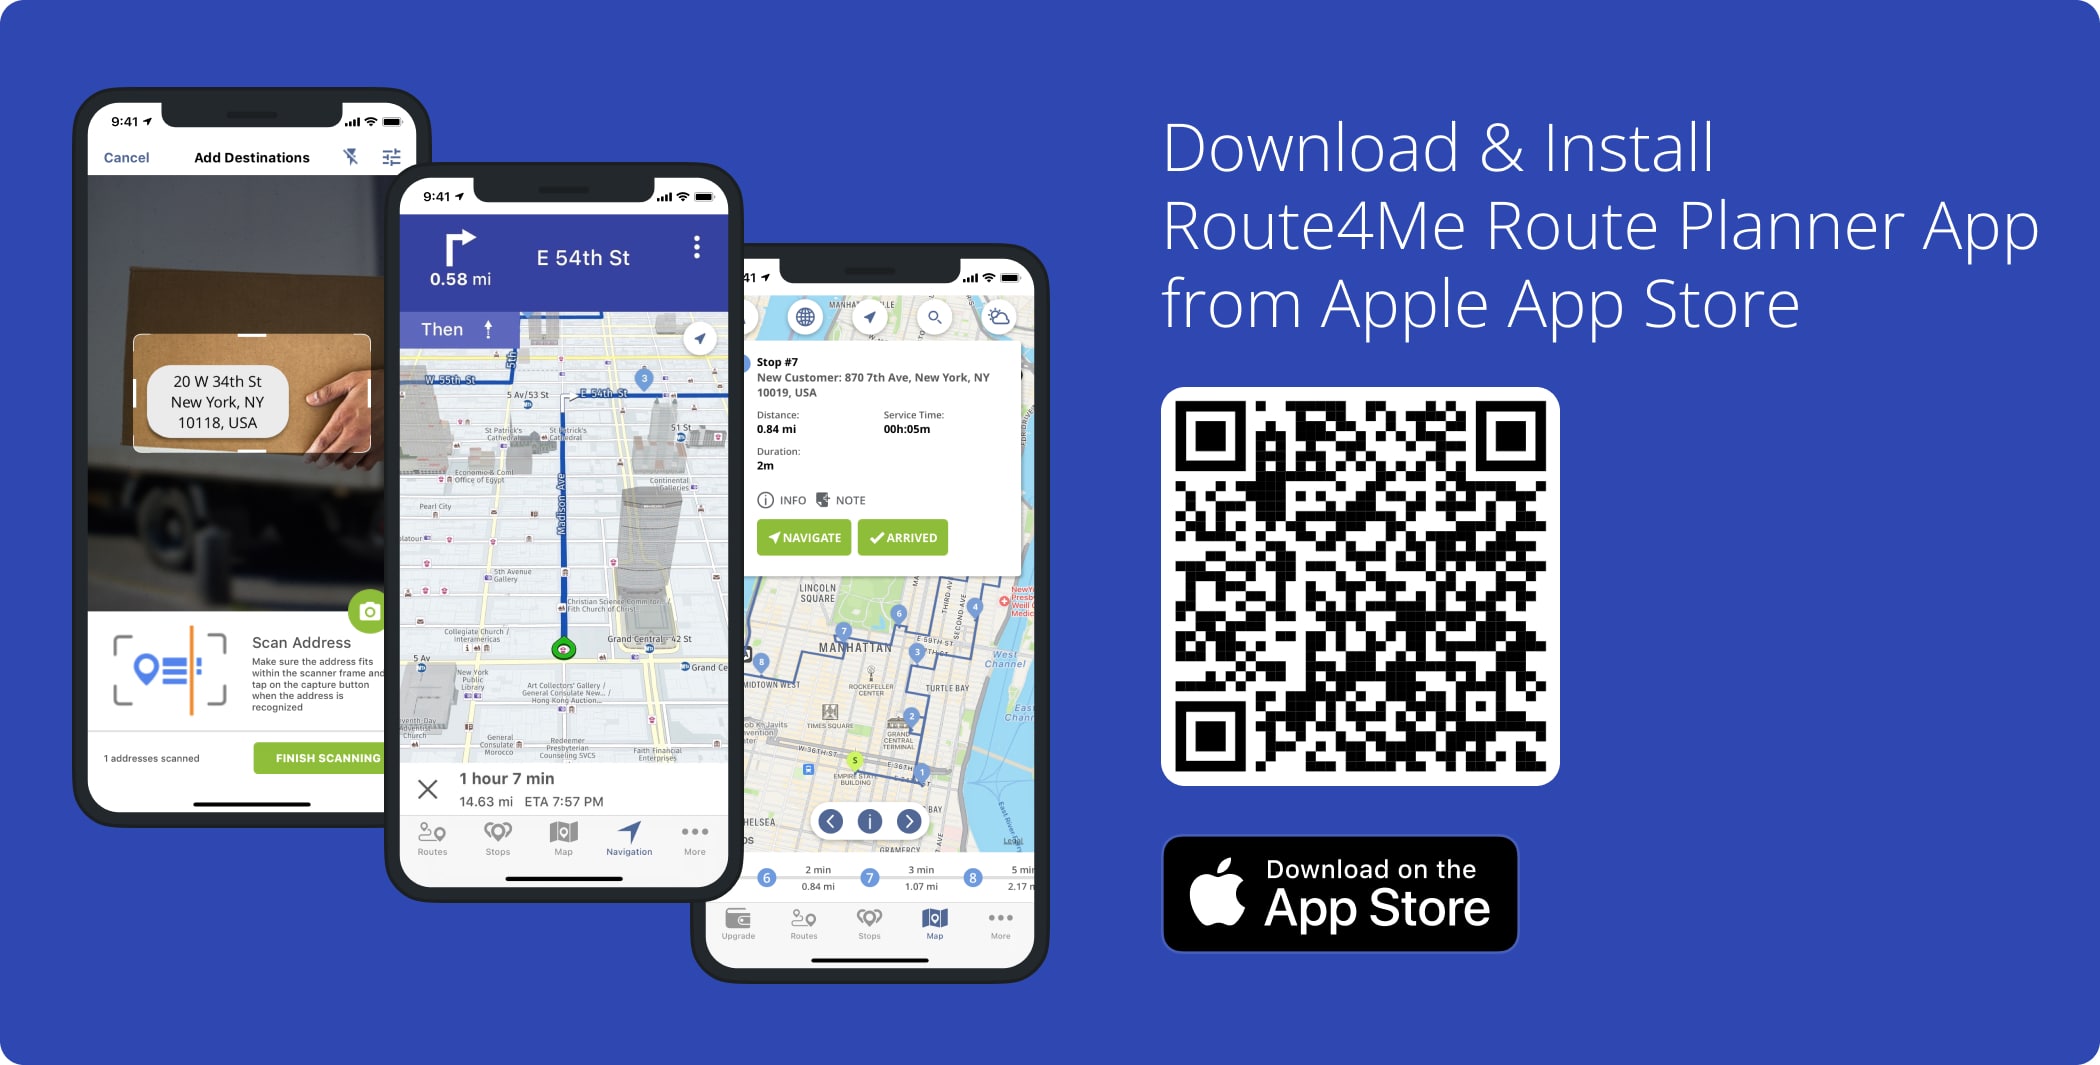 Download and install Route4Me iOS Route Planner app on your iPhone or iPad from the Apple App Store.